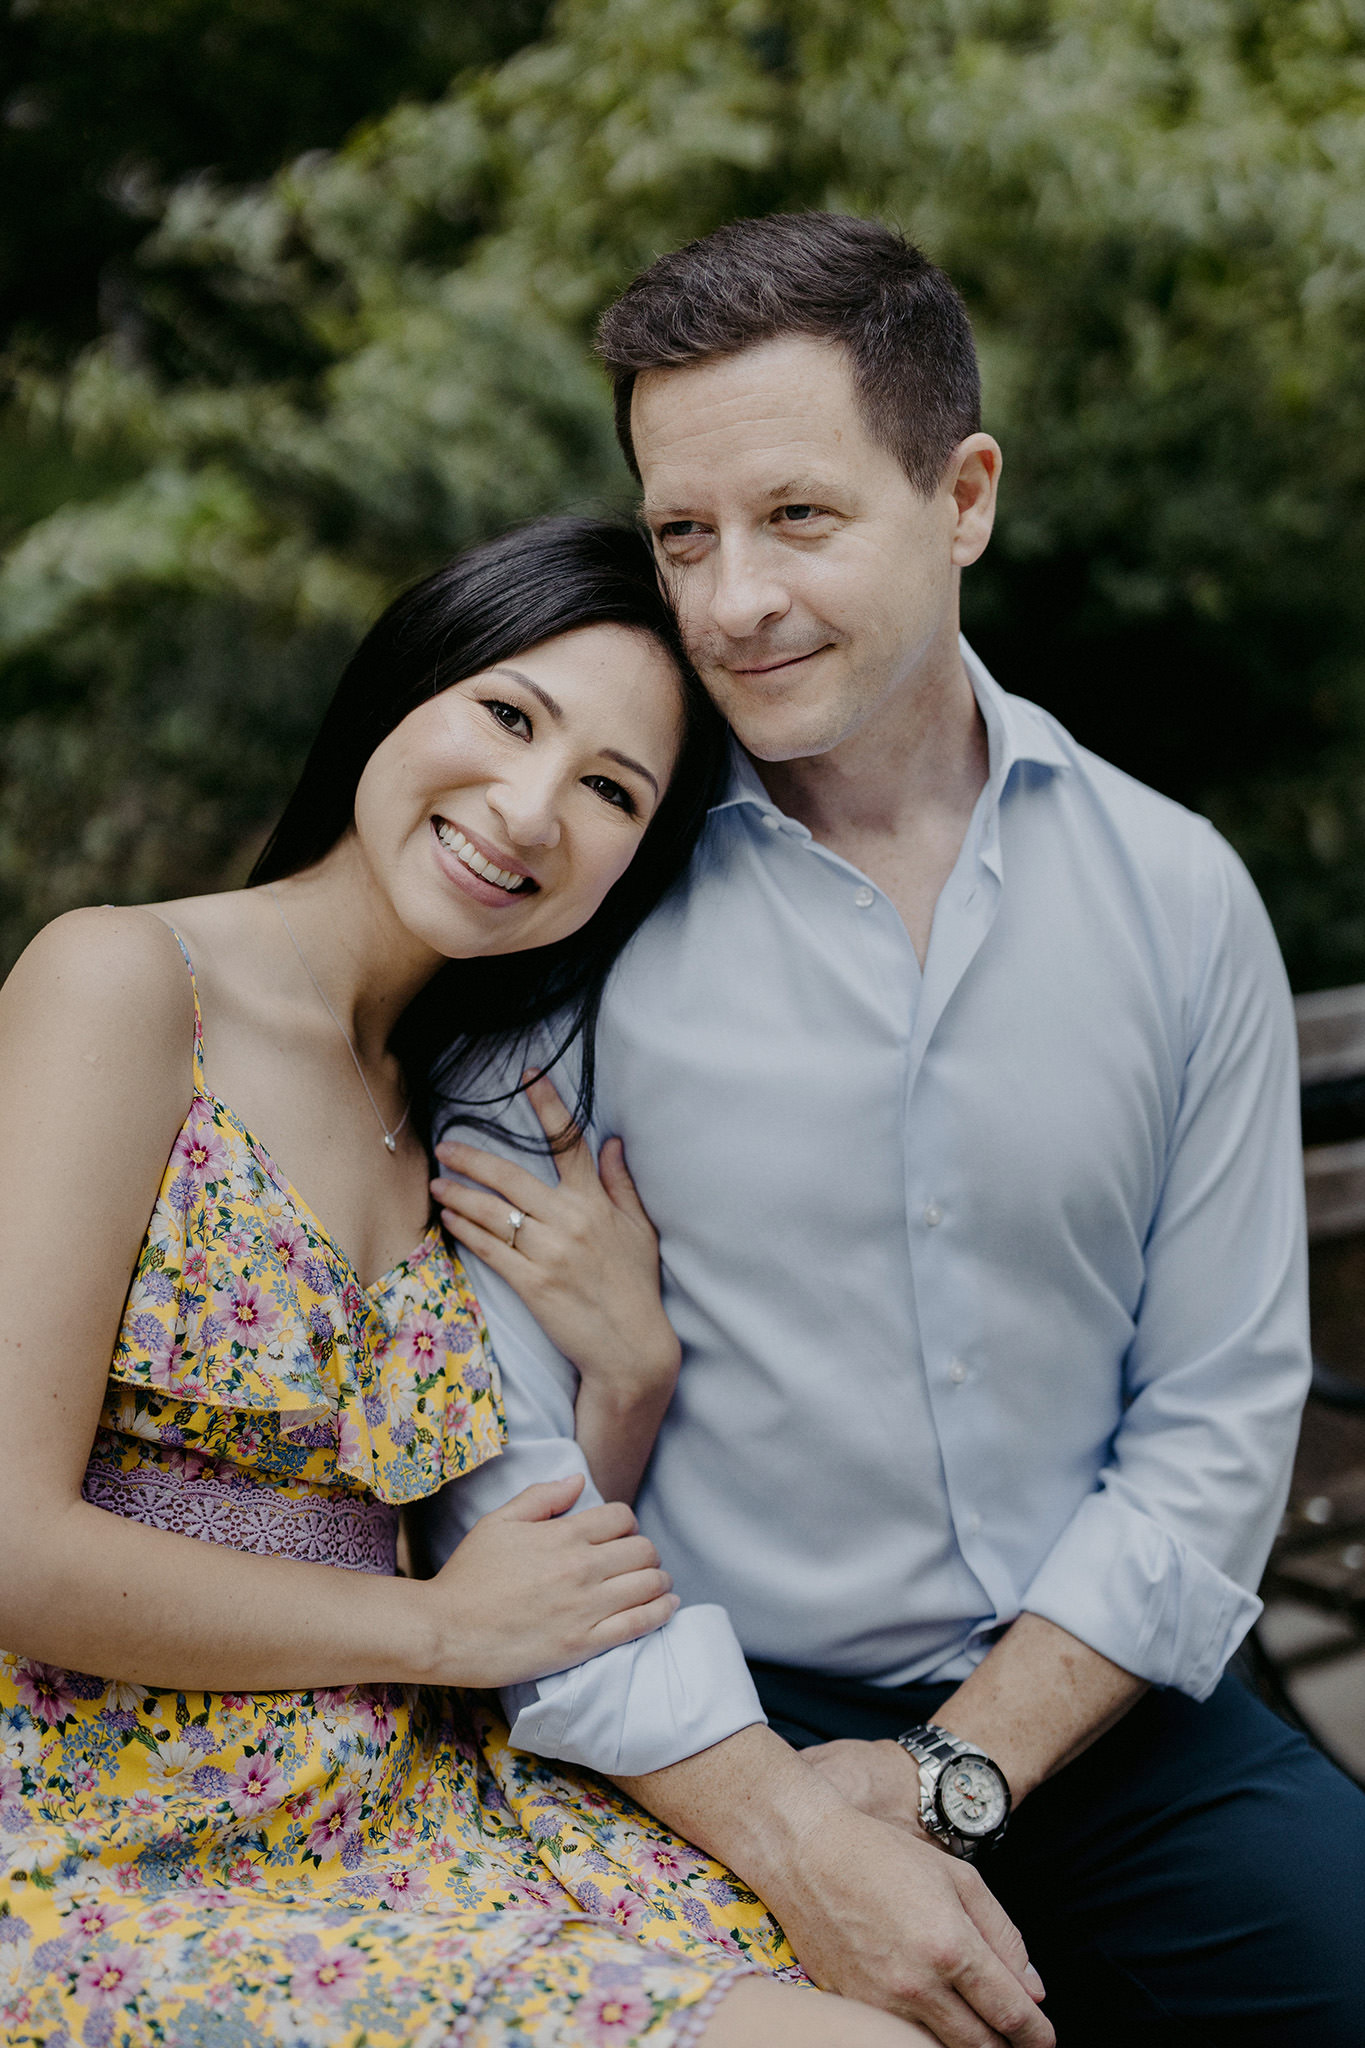 The engaged couple is smiling while sitting on a bench at Central Park. NYC summer engagement image by Jenny Fu Studio